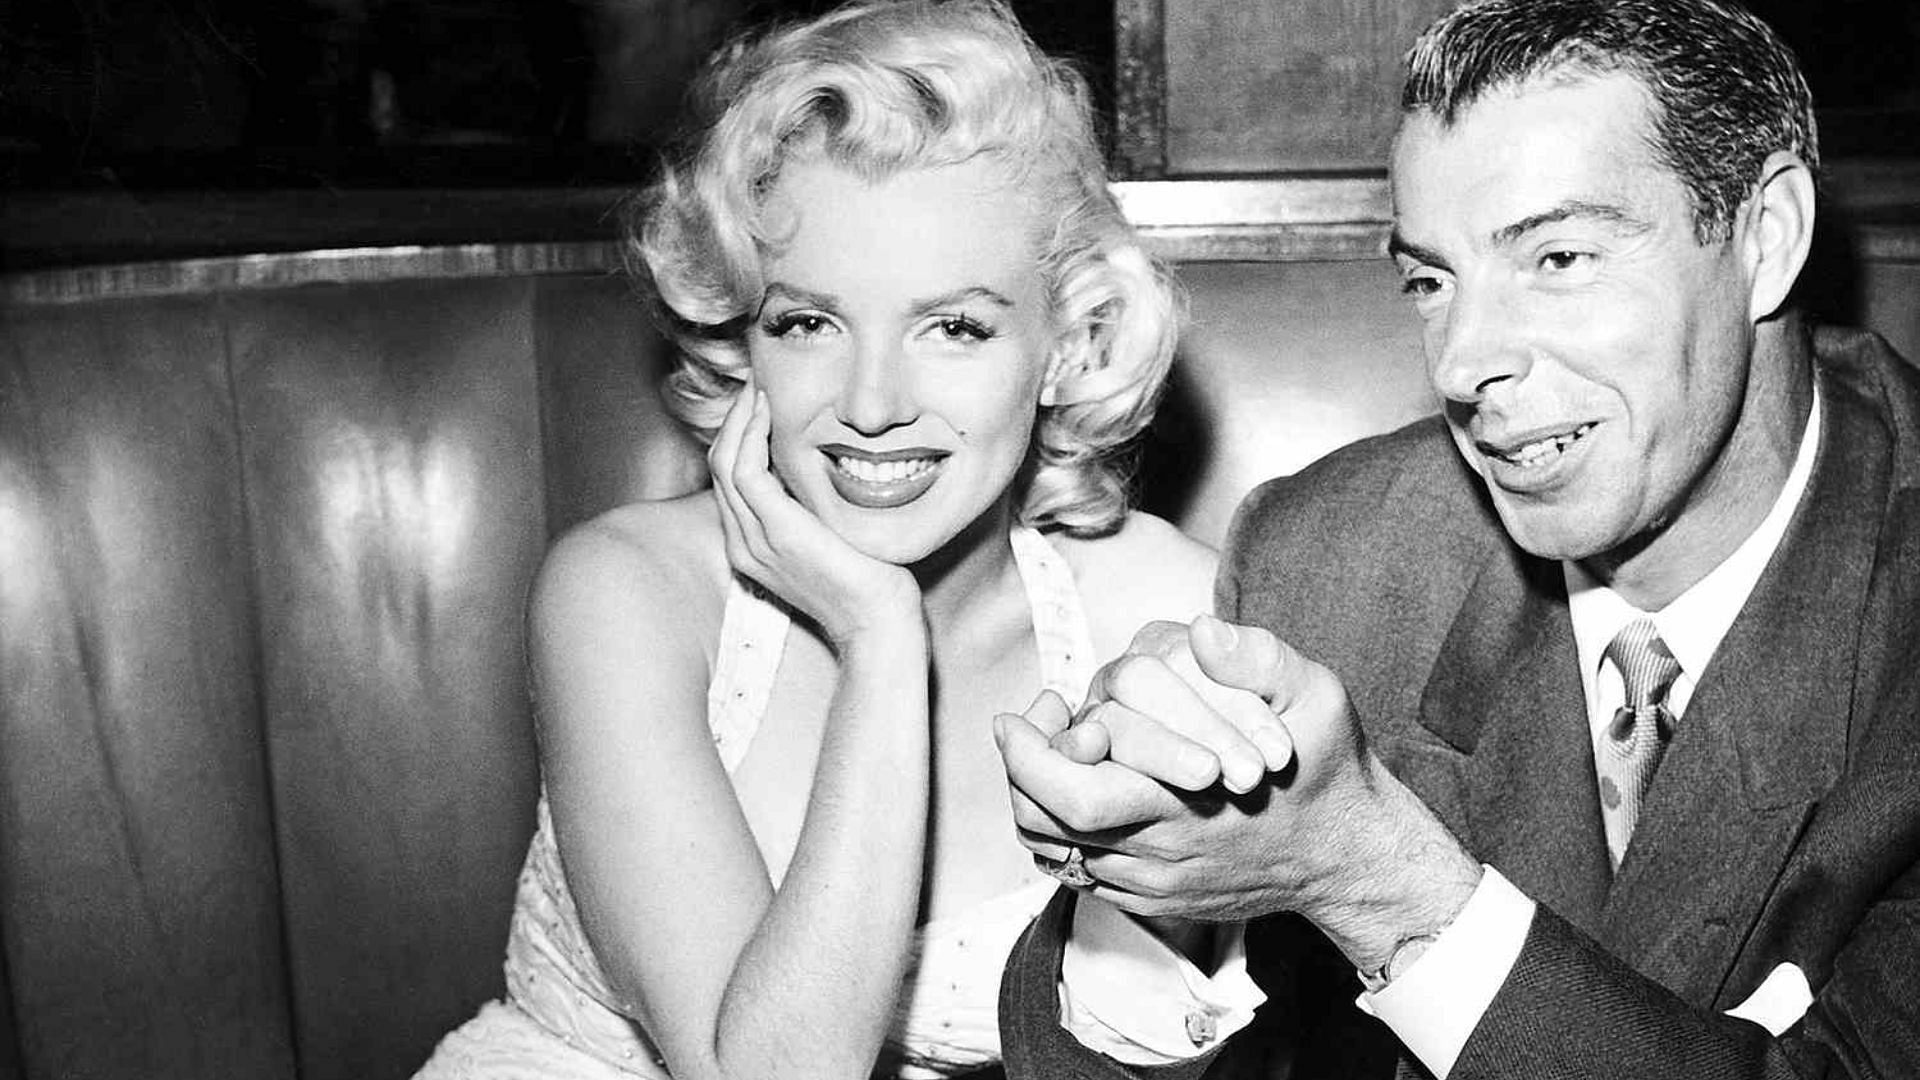 World Famous legendary actress and singer, Marilyn Monroe. And the 9 times World Champion and Yankees icon, Joe DiMaggio. (Source: People.com)